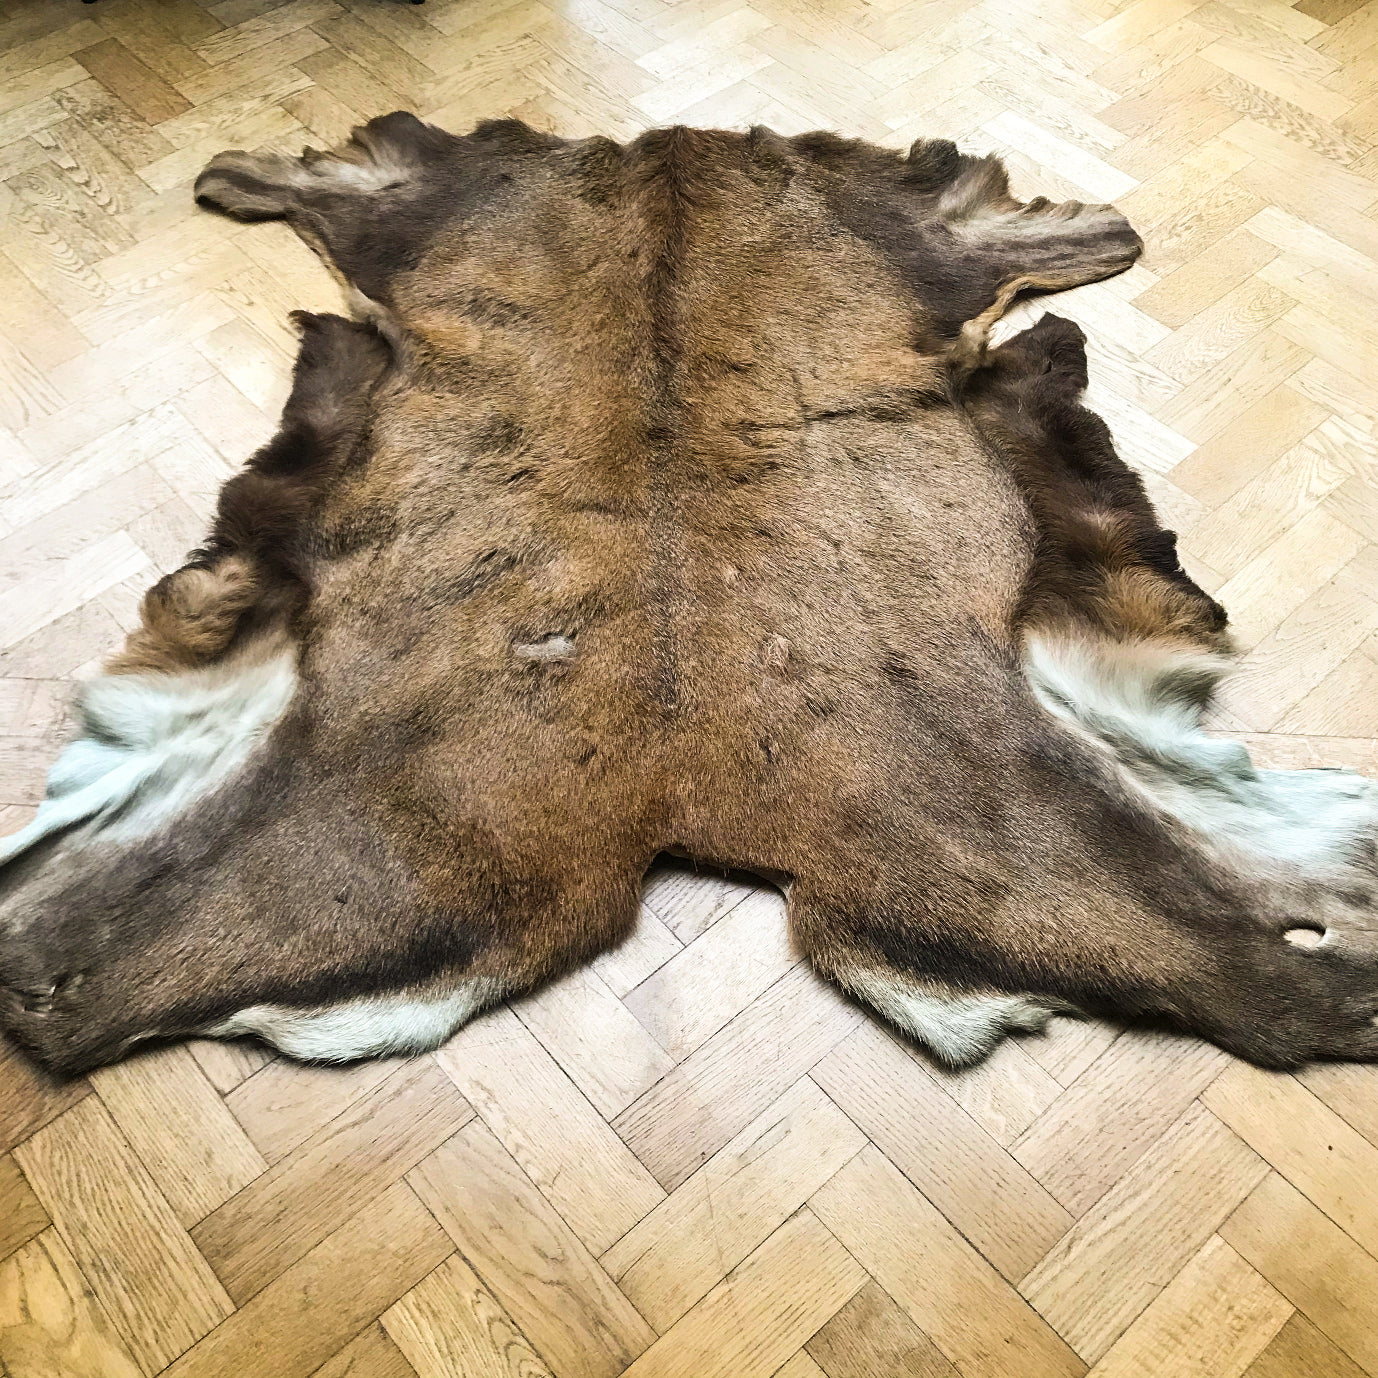 This sumptuous deer skin hide will add a touch of traditional luxury to any contemporary home. Its warm mixture of brown tones and characteristic markings will make a fabulously individual floor covering, couch drape or statement wall-piece - SHOP NOW - www.intovintage.co.uk